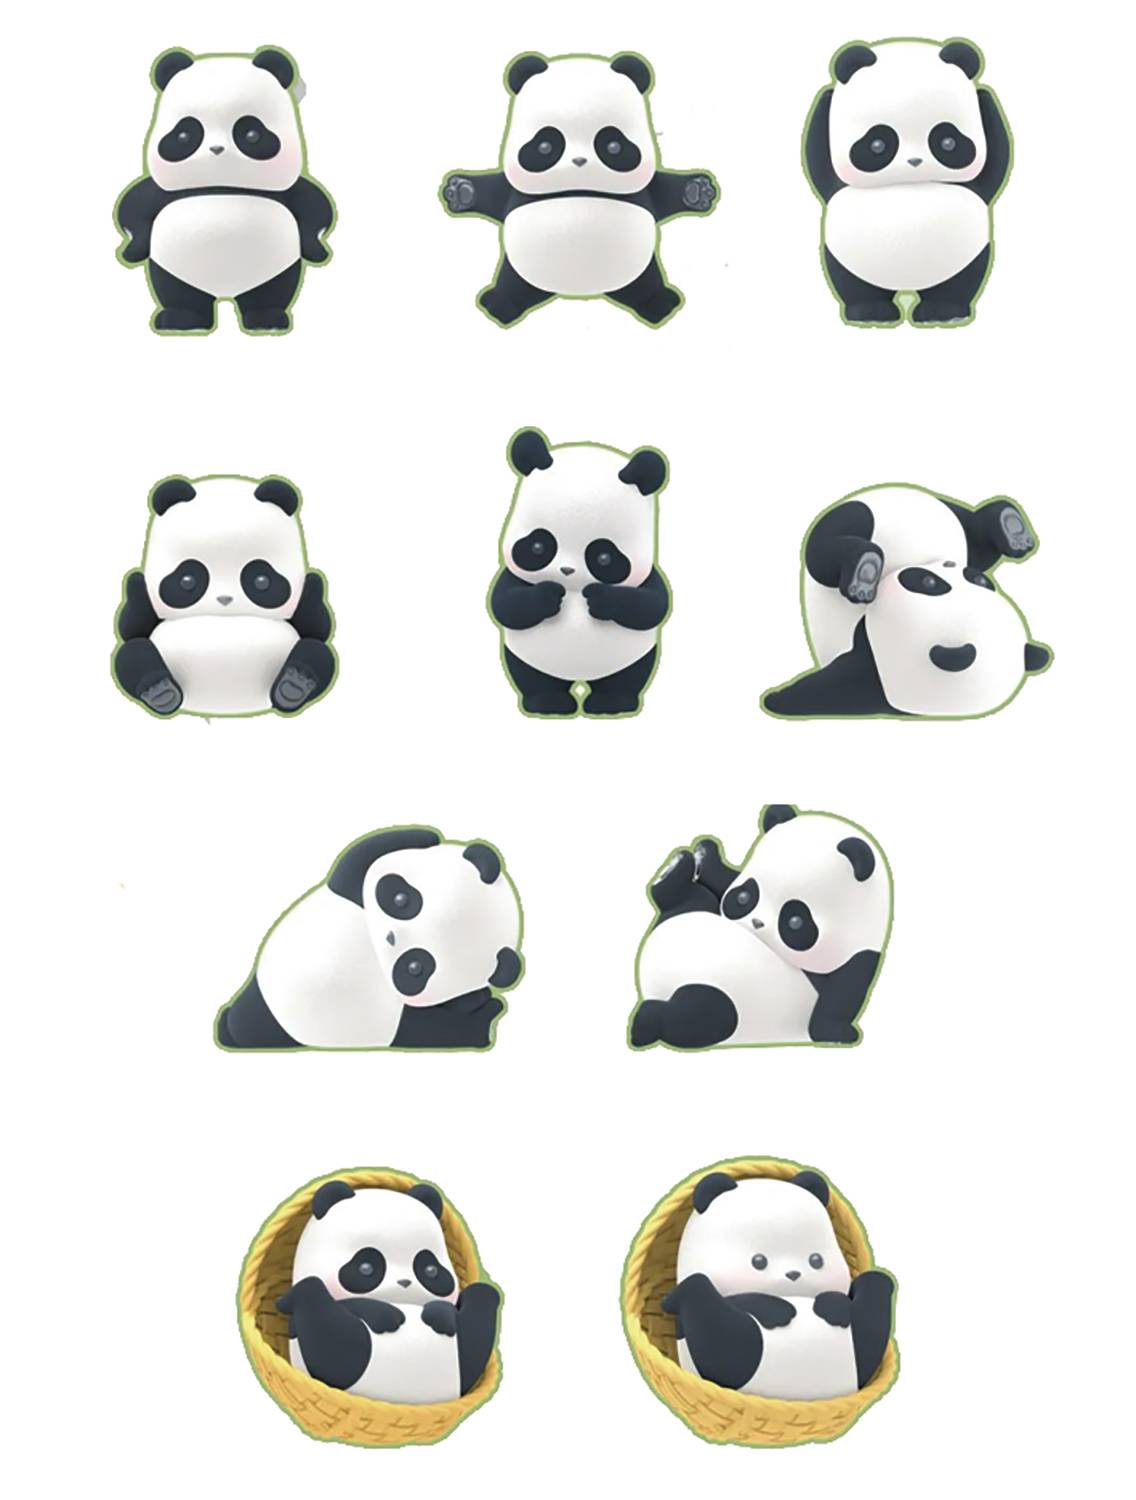 52 TOYS PANDA ROLL DAILY LIFE SERIES2 8PC BMB DS